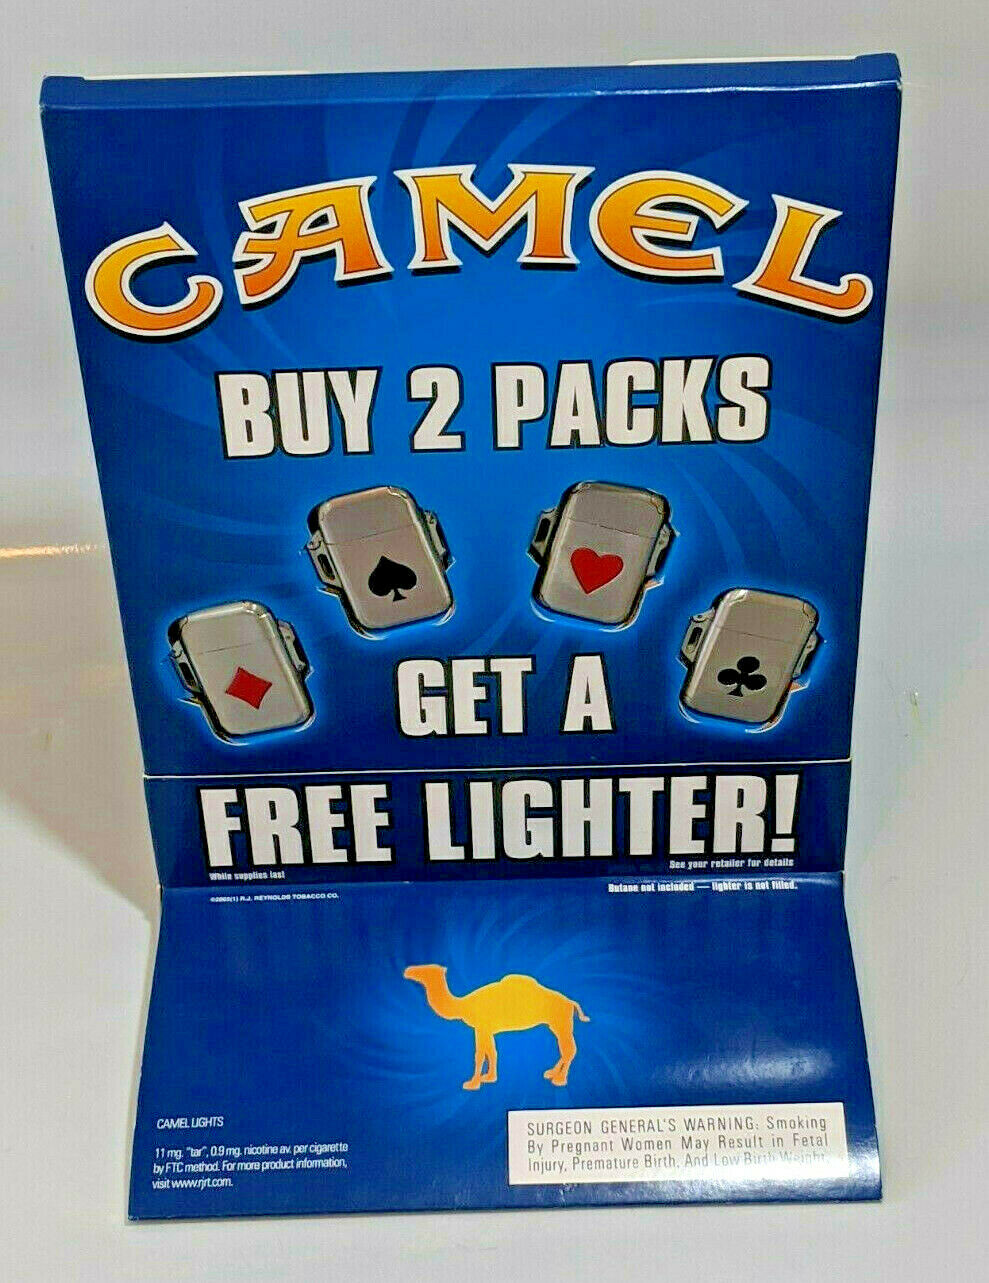 Camel Cigarettes Free Lighter Store Display 2005 4 Lighters Card Suits Unfired